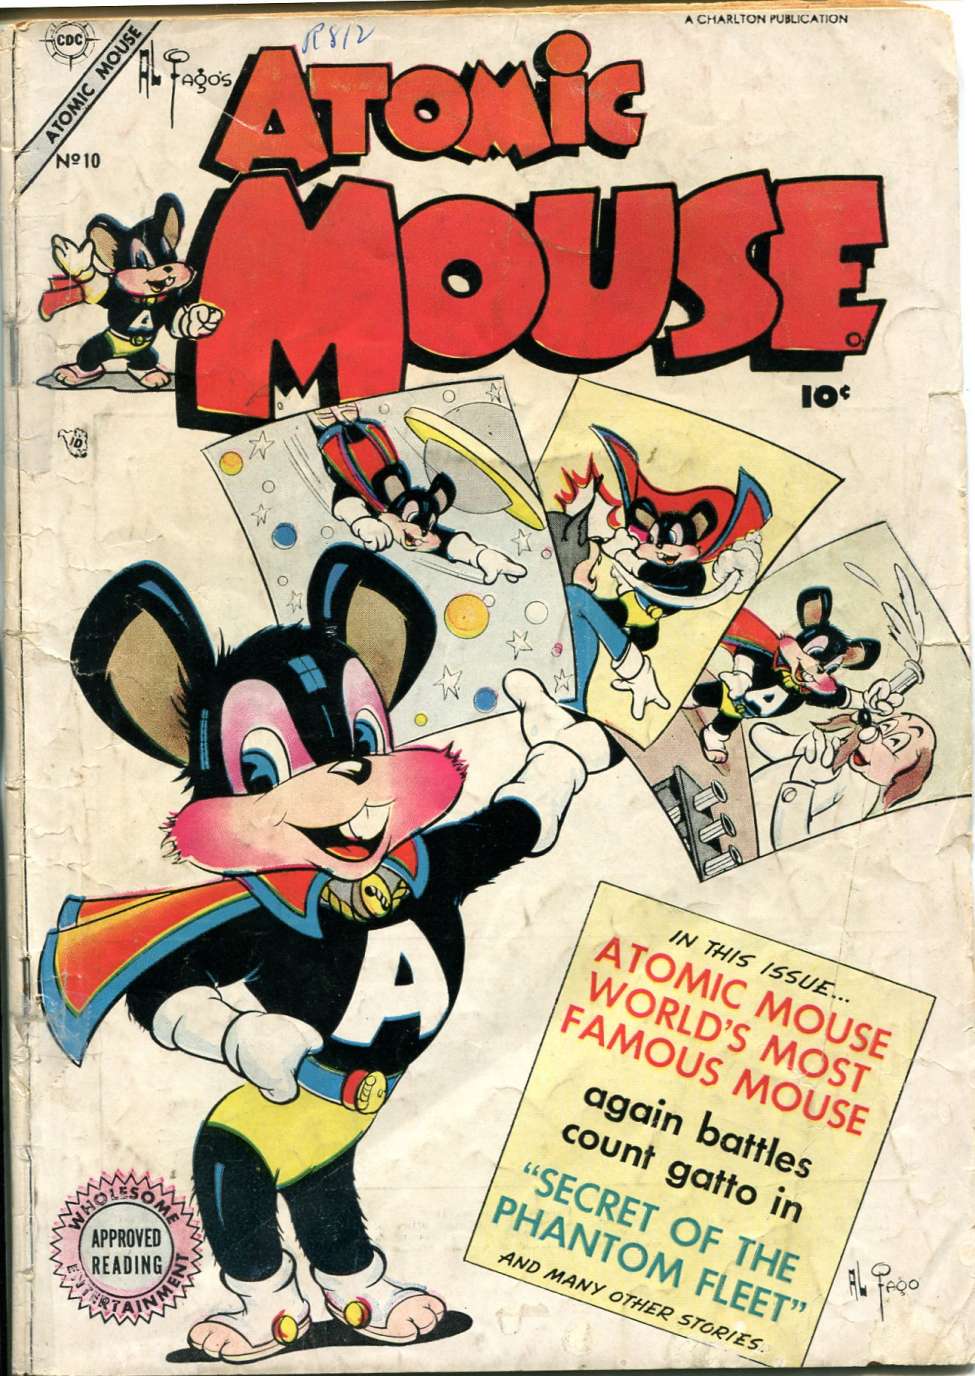 Book Cover For Atomic Mouse 10